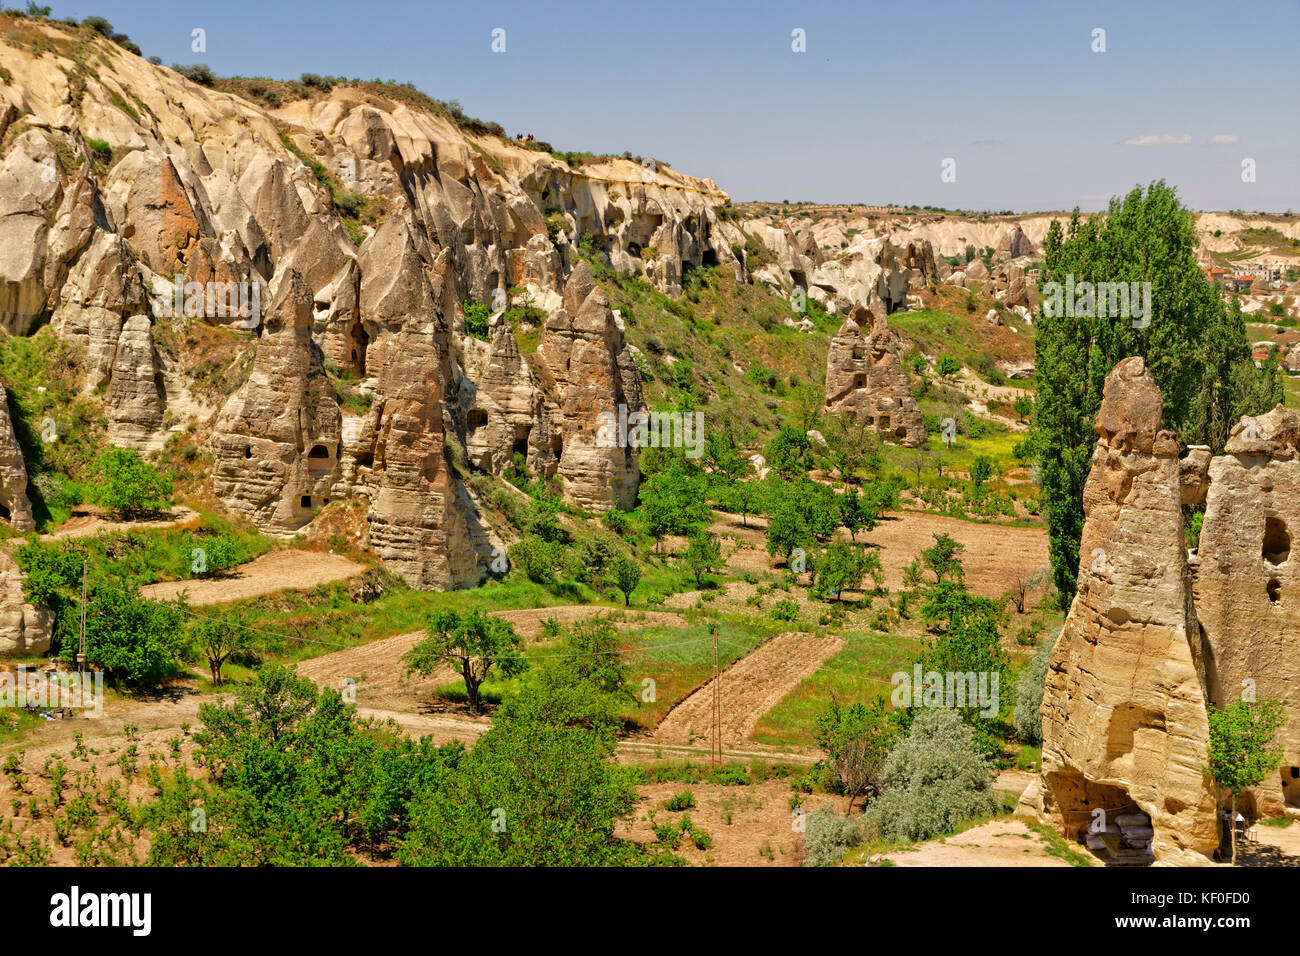 Cave dwellings and fairy chimneys at Goreme National Park, Cappadocia, Turkey Stock Photo